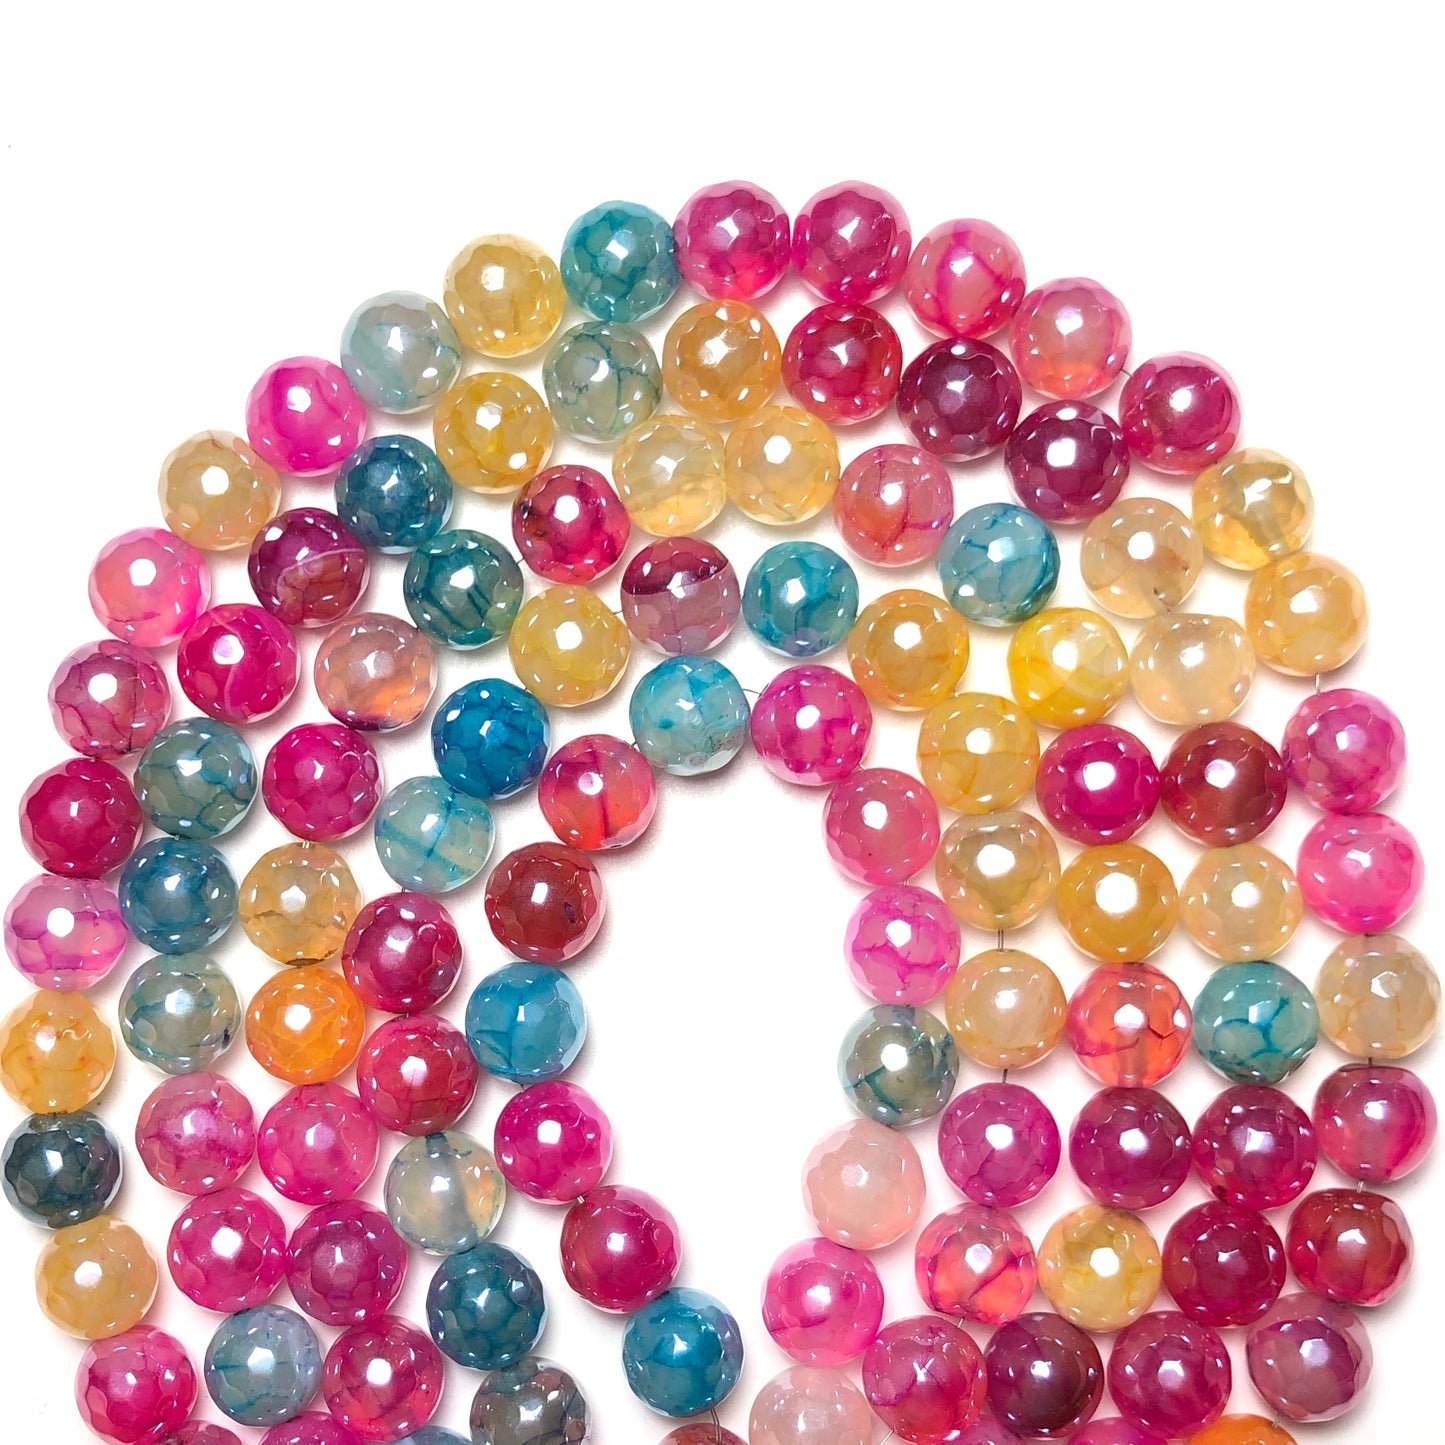 2 Strands/lot 10mm Electroplated Multicolor Agate Faceted Stone Beads Electroplated Beads Electroplated Faceted Agate Beads New Beads Arrivals Charms Beads Beyond